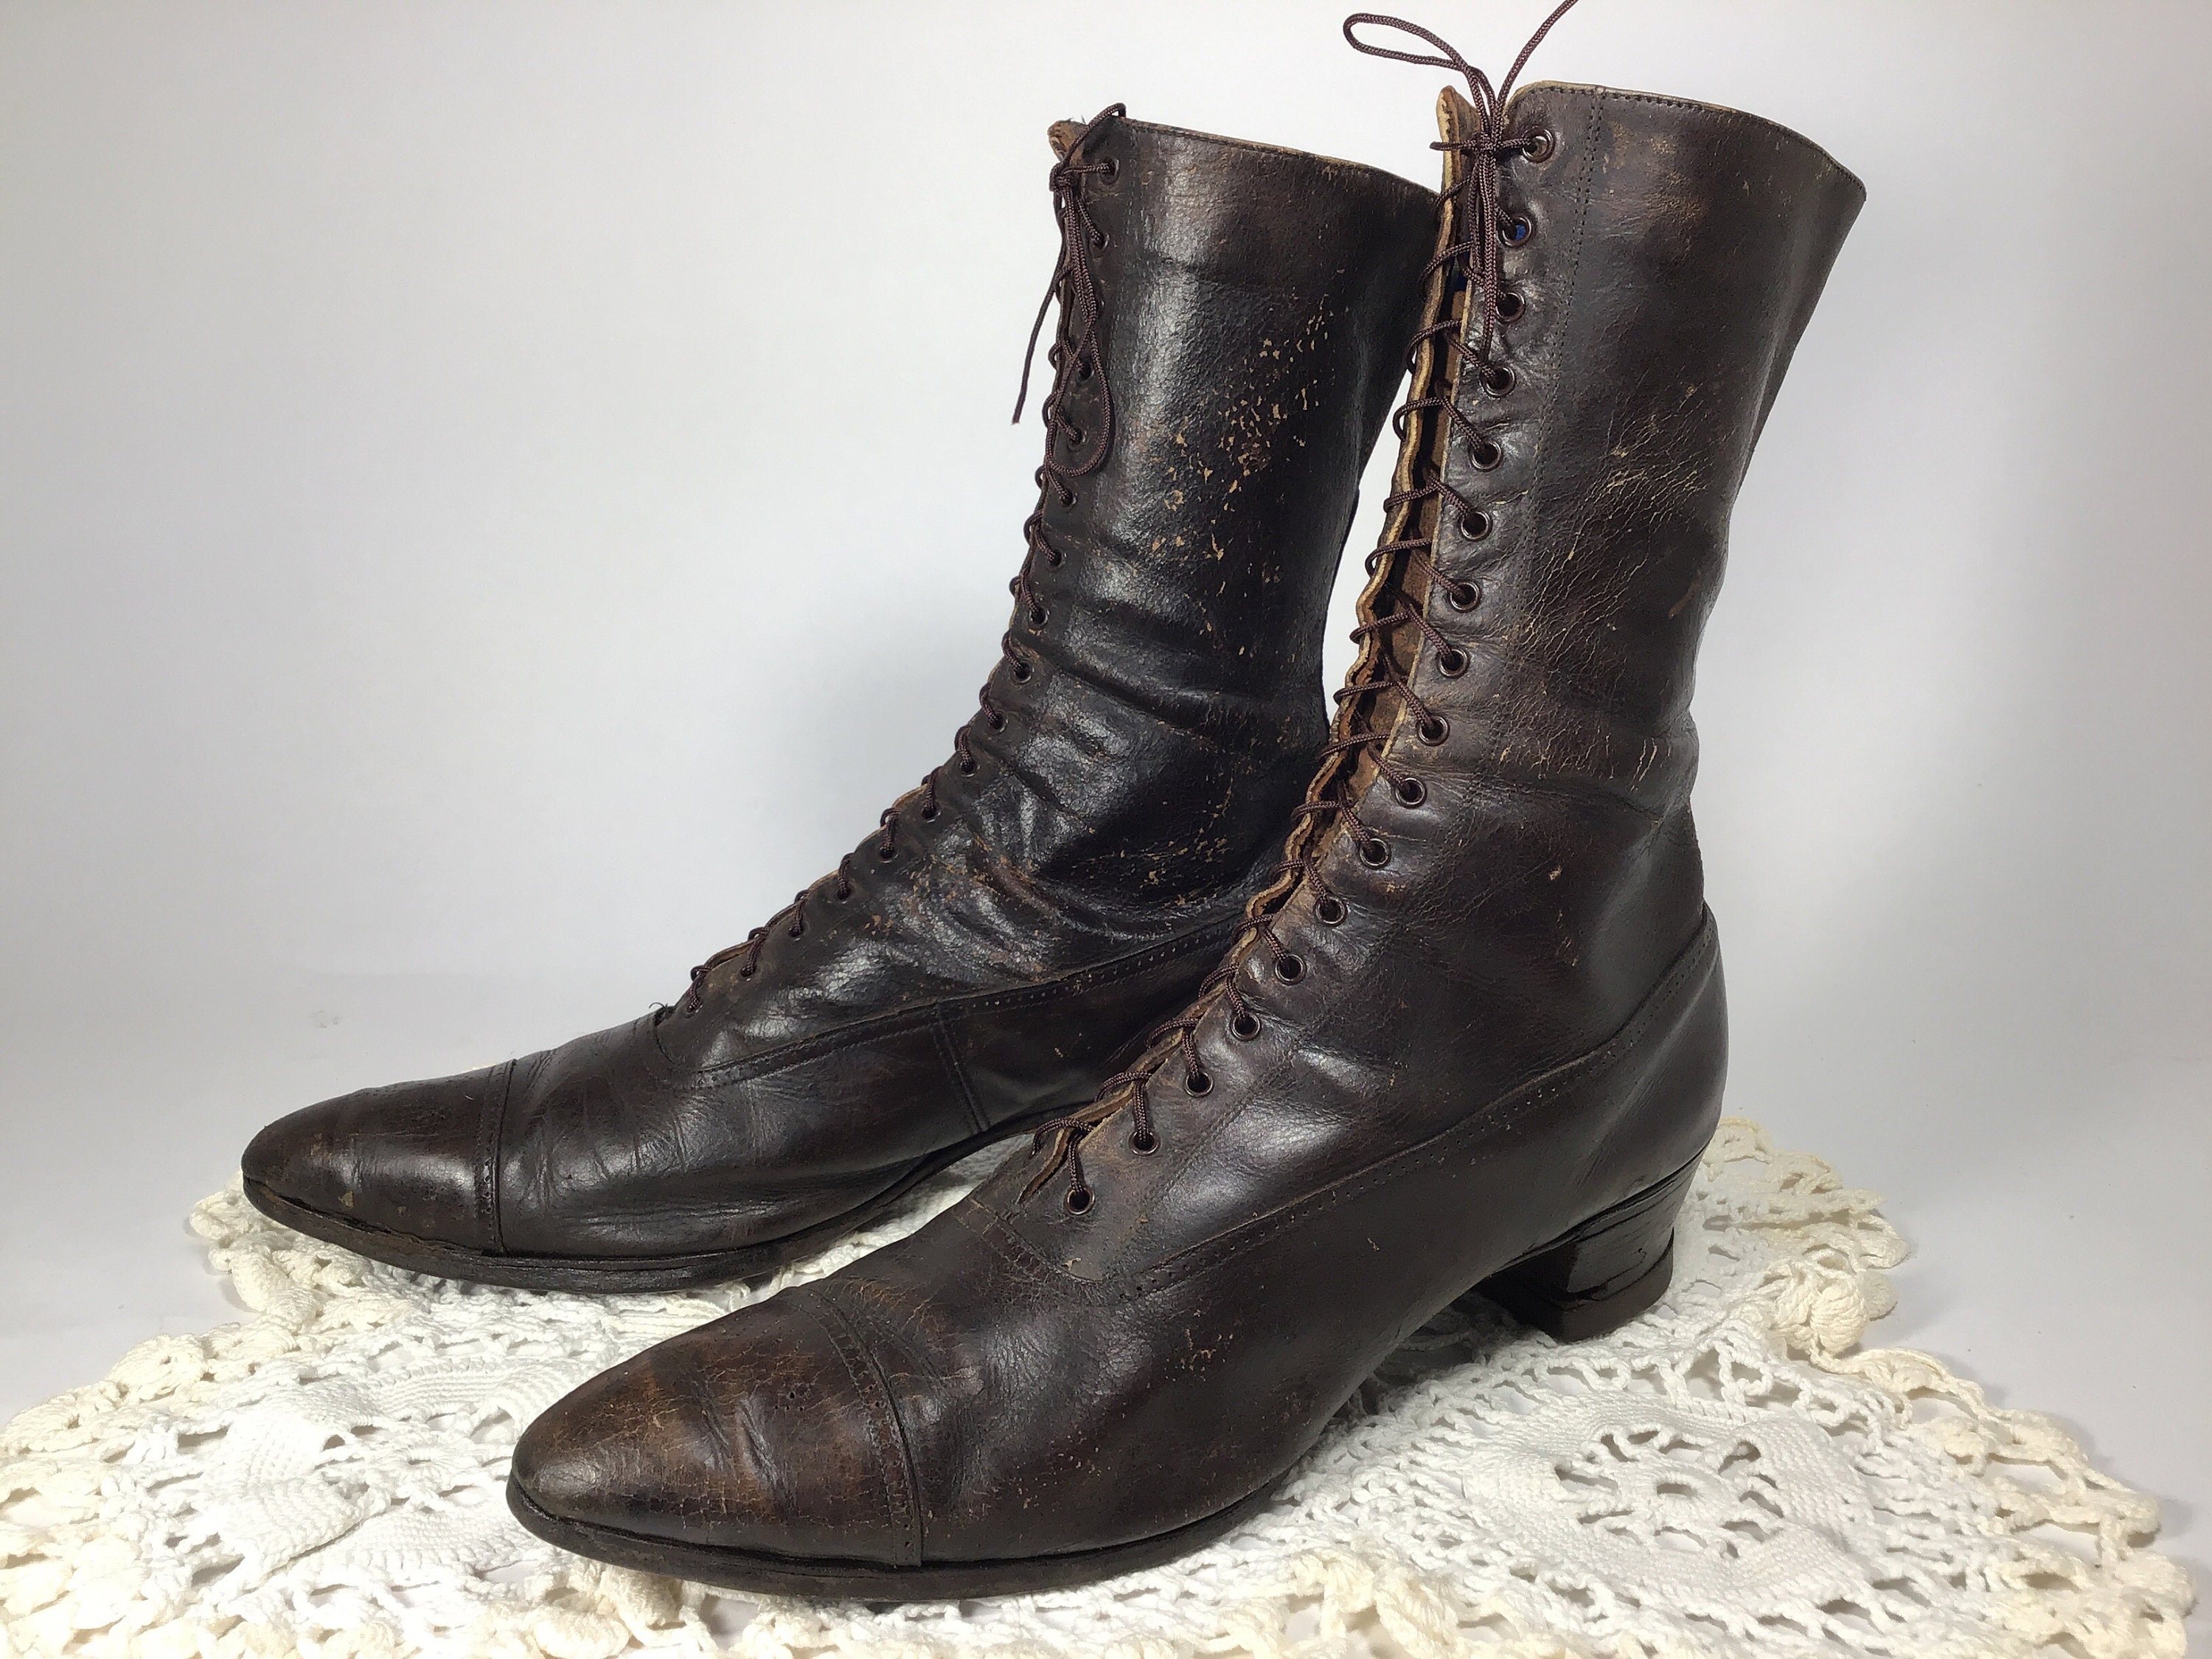 VTG 1890s Victorian womens High Lace Up Leather boots shoes Peters St Louis